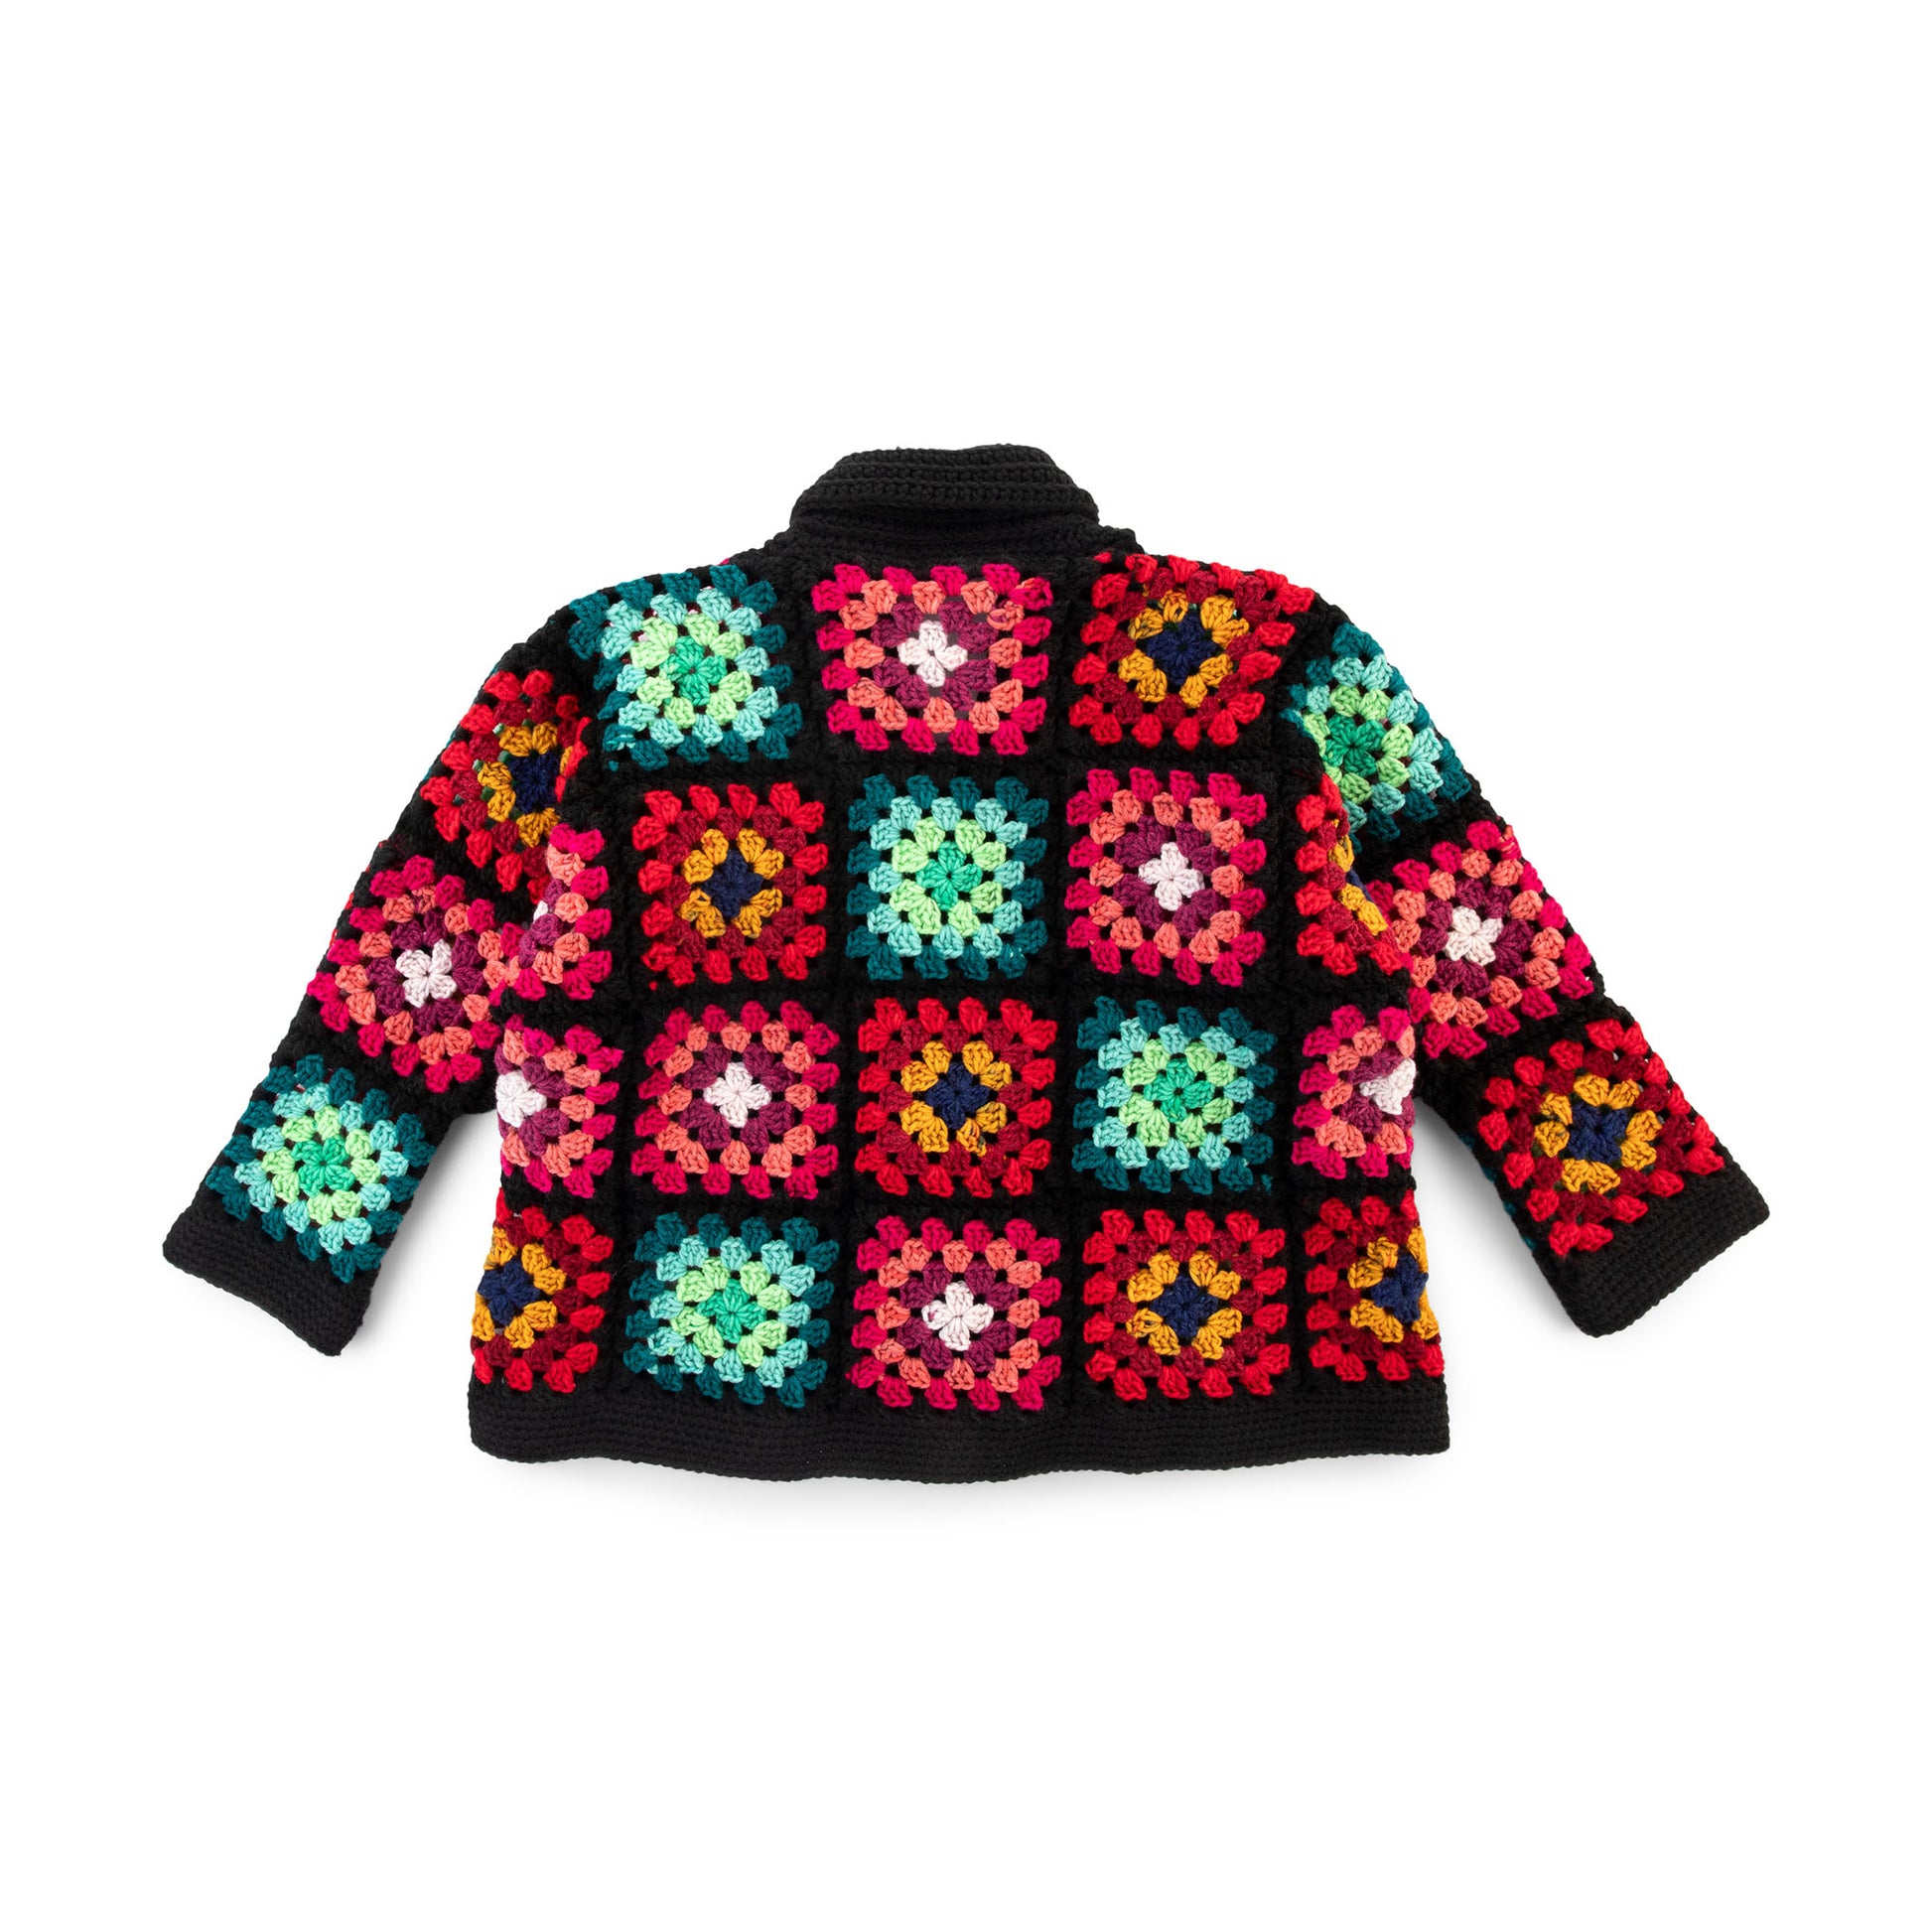 Crochet Granny Square Sweater in Red Heart Soft Solids - WR1095